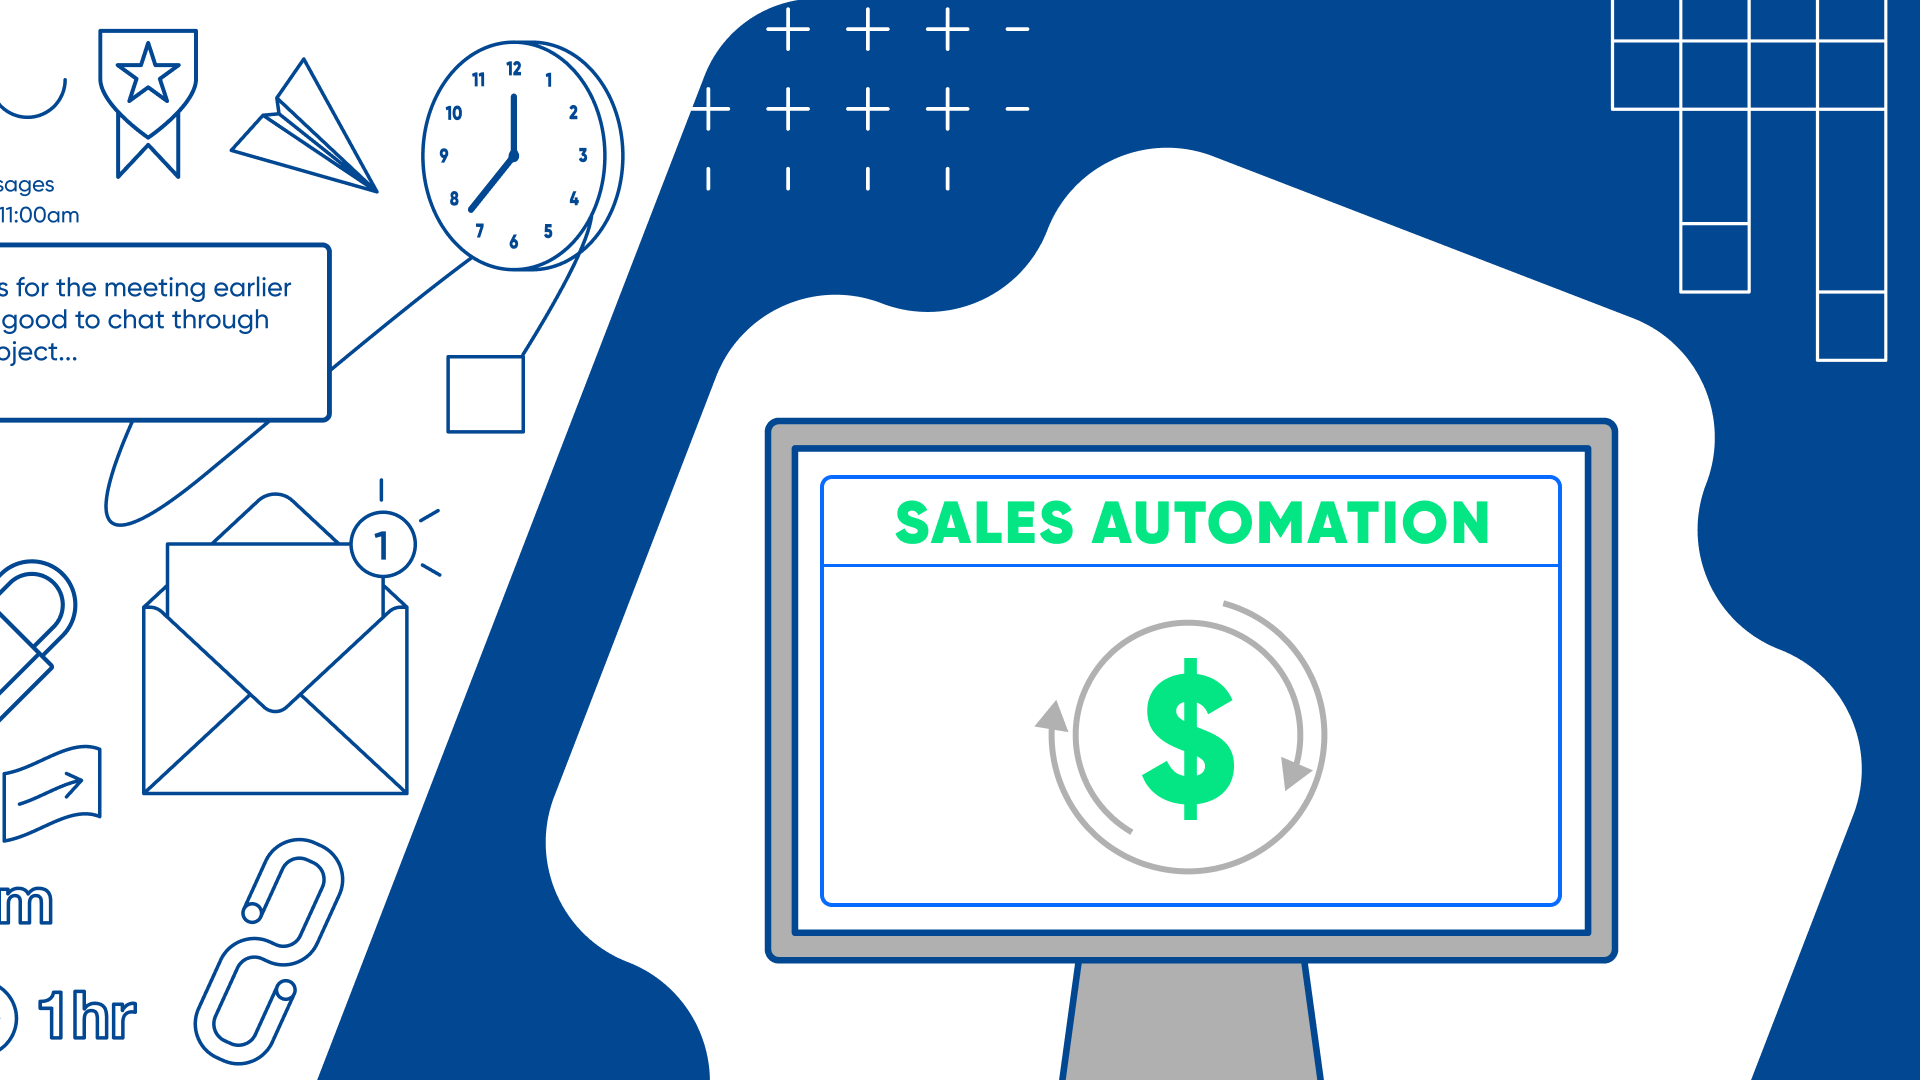 Automating your sales workflow, like meeting scheduling or lead handoff, helps your team deliver a consistent (and winning) strategy in less time.